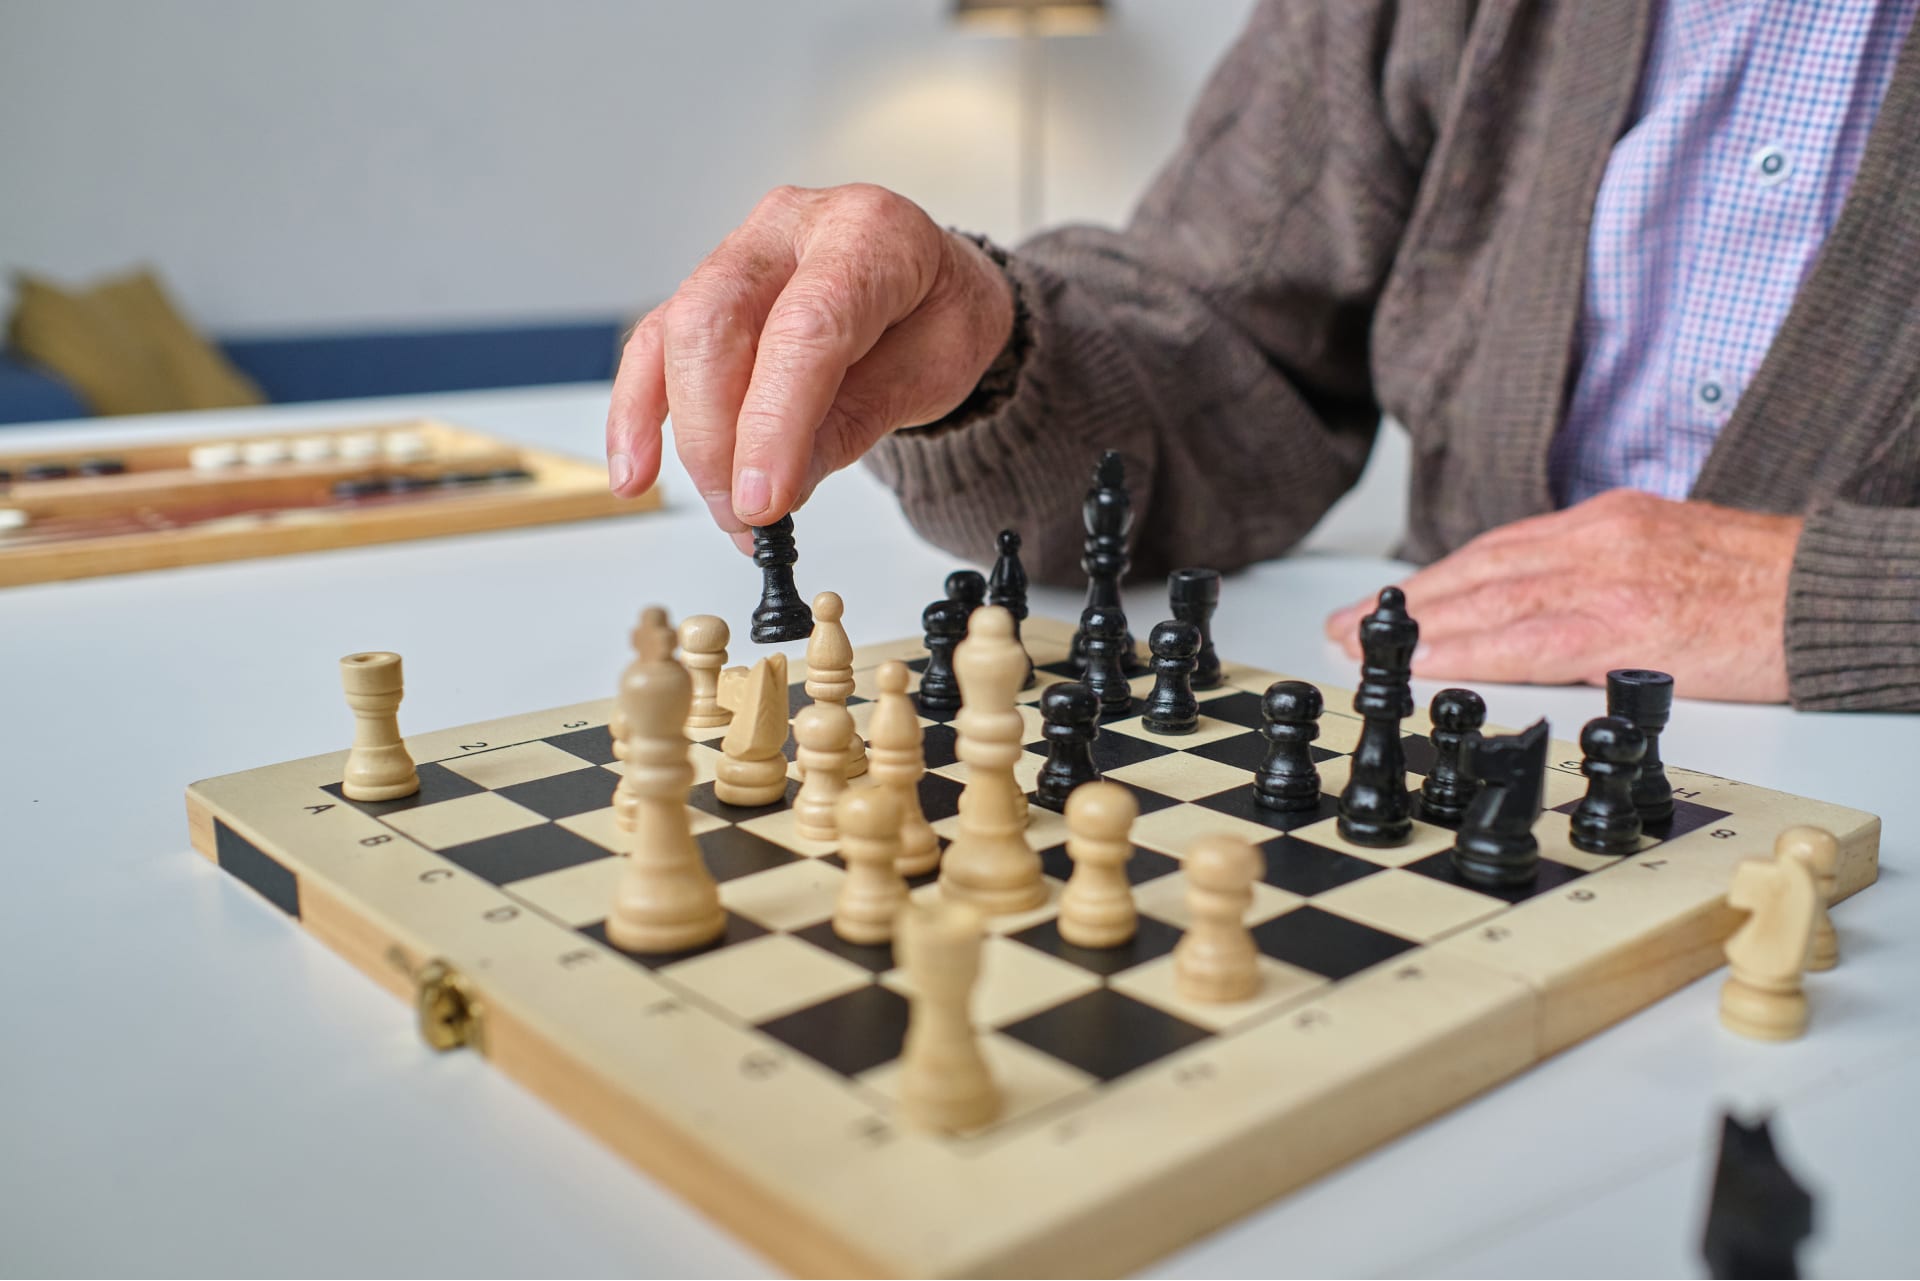 Senior citizen man playing chess at an assisted living home